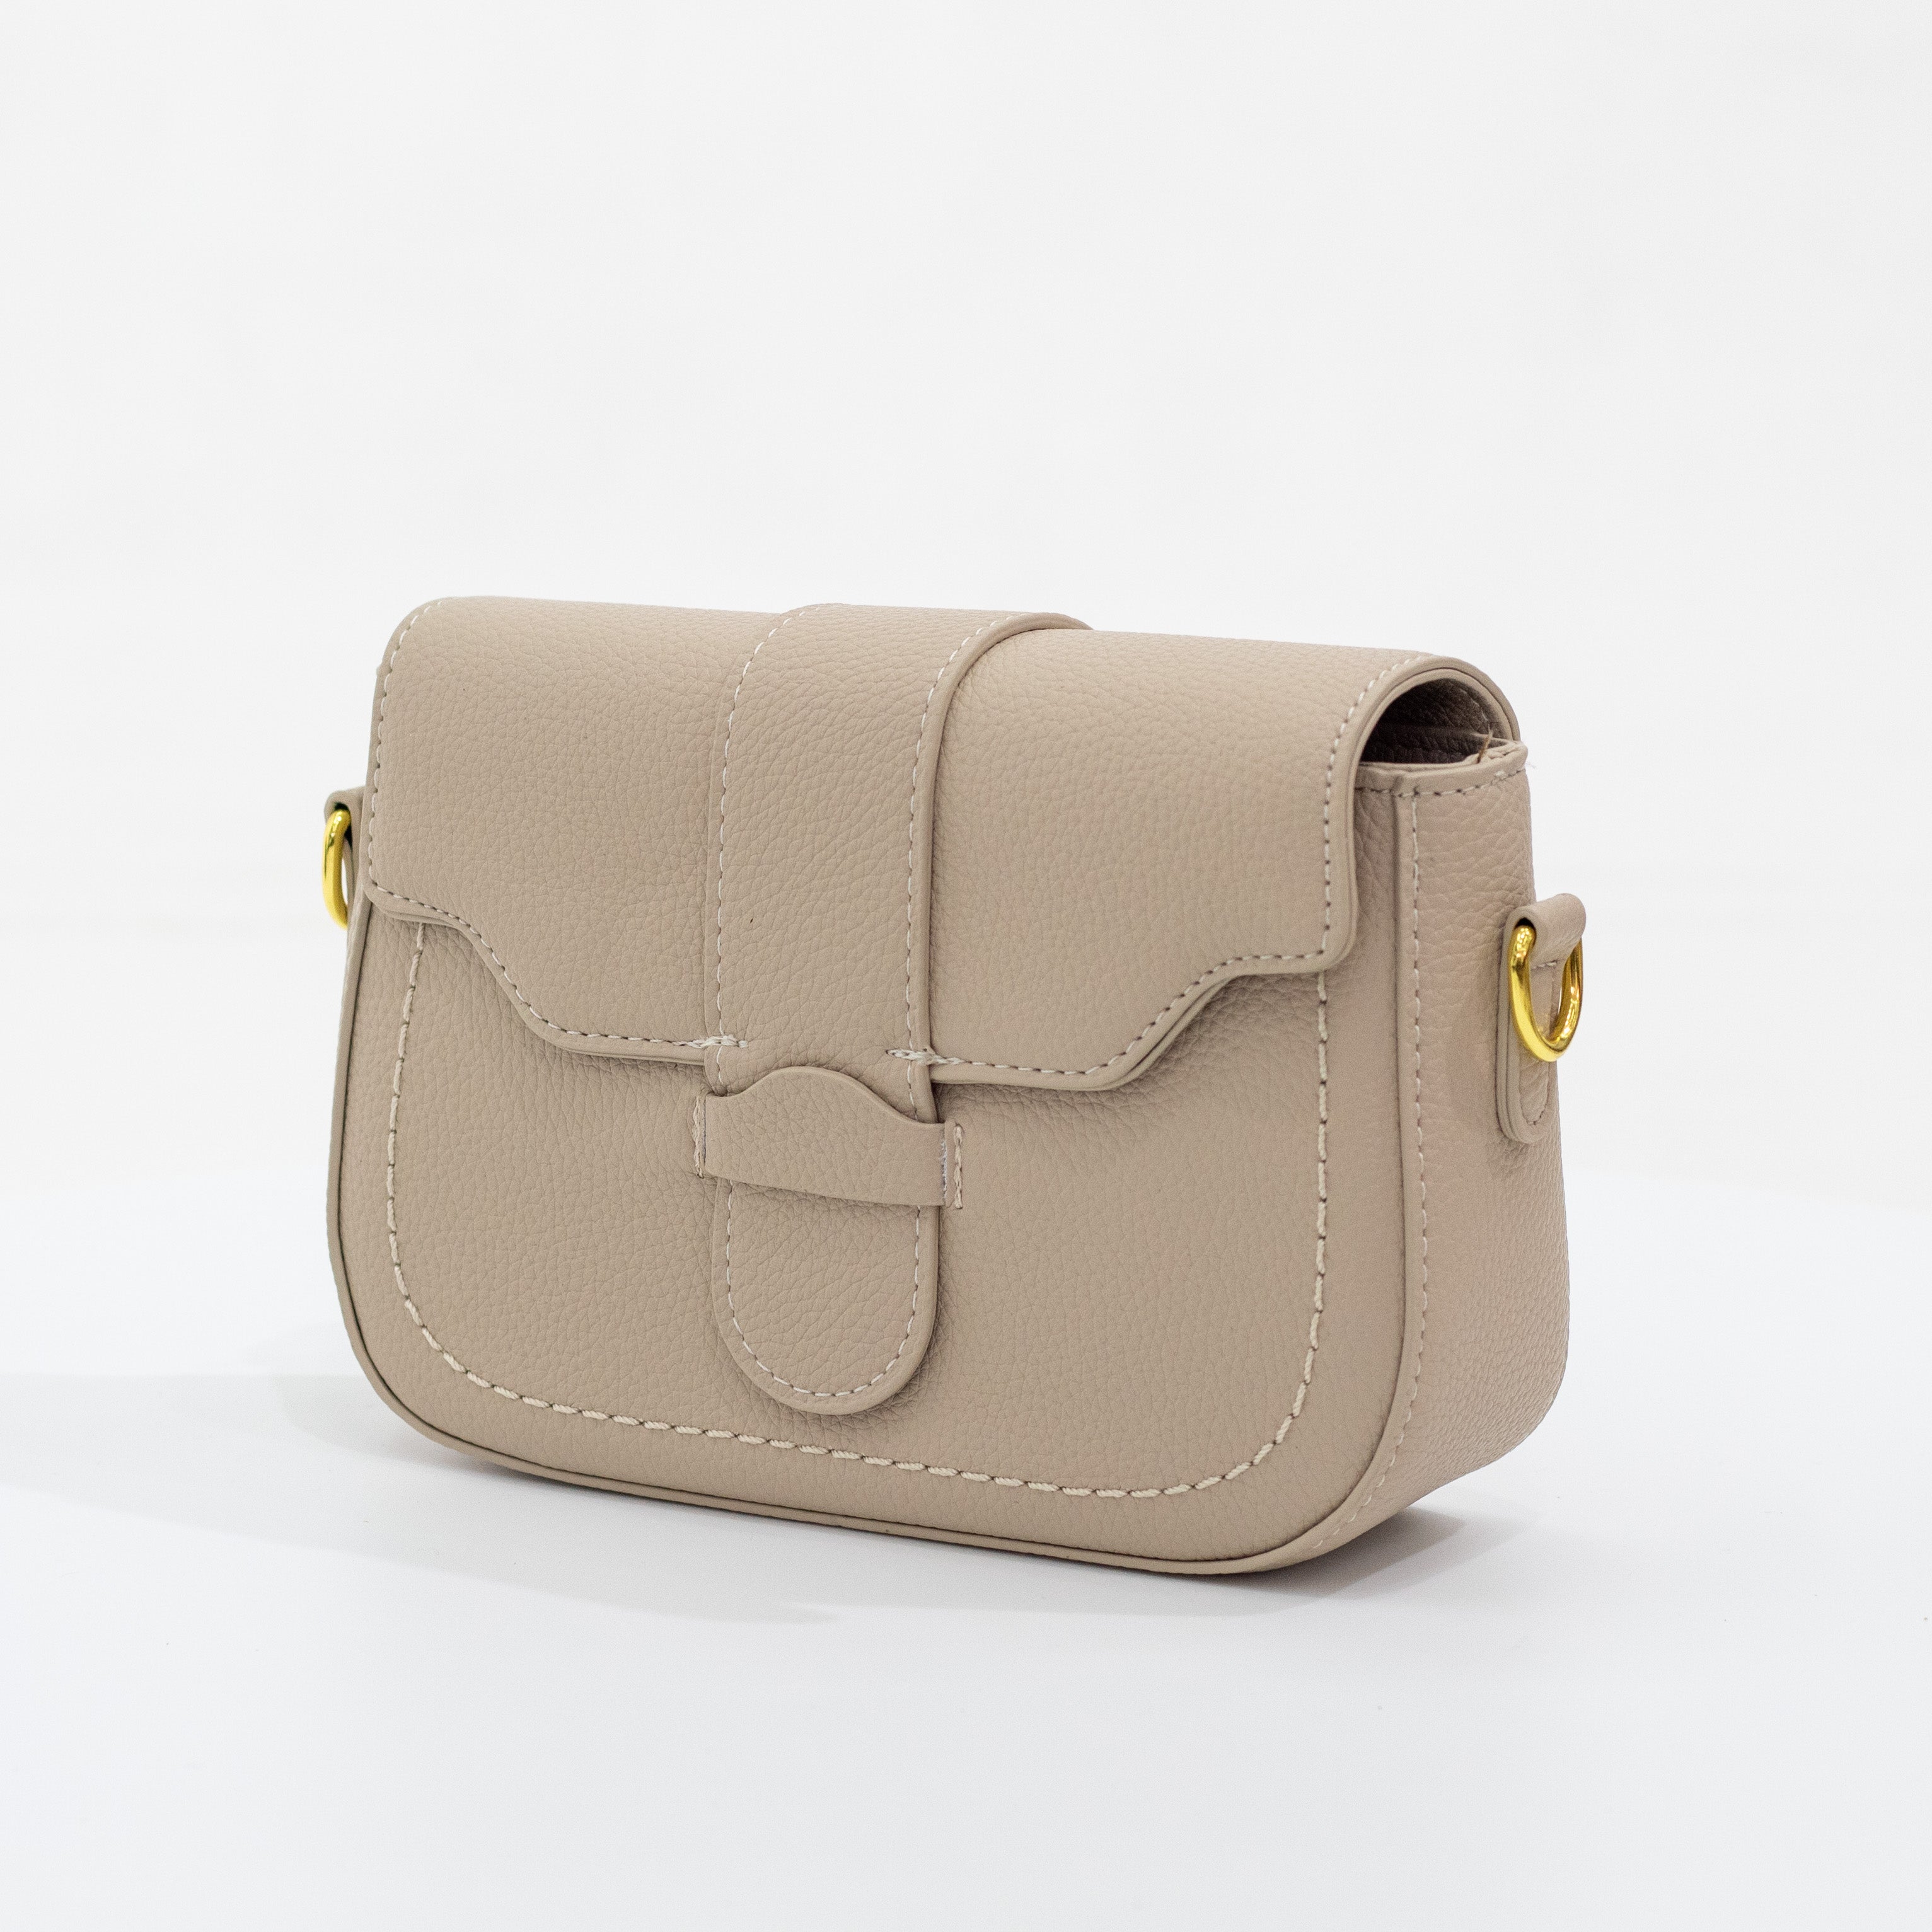 Taupe crossbody faux leather bag jen